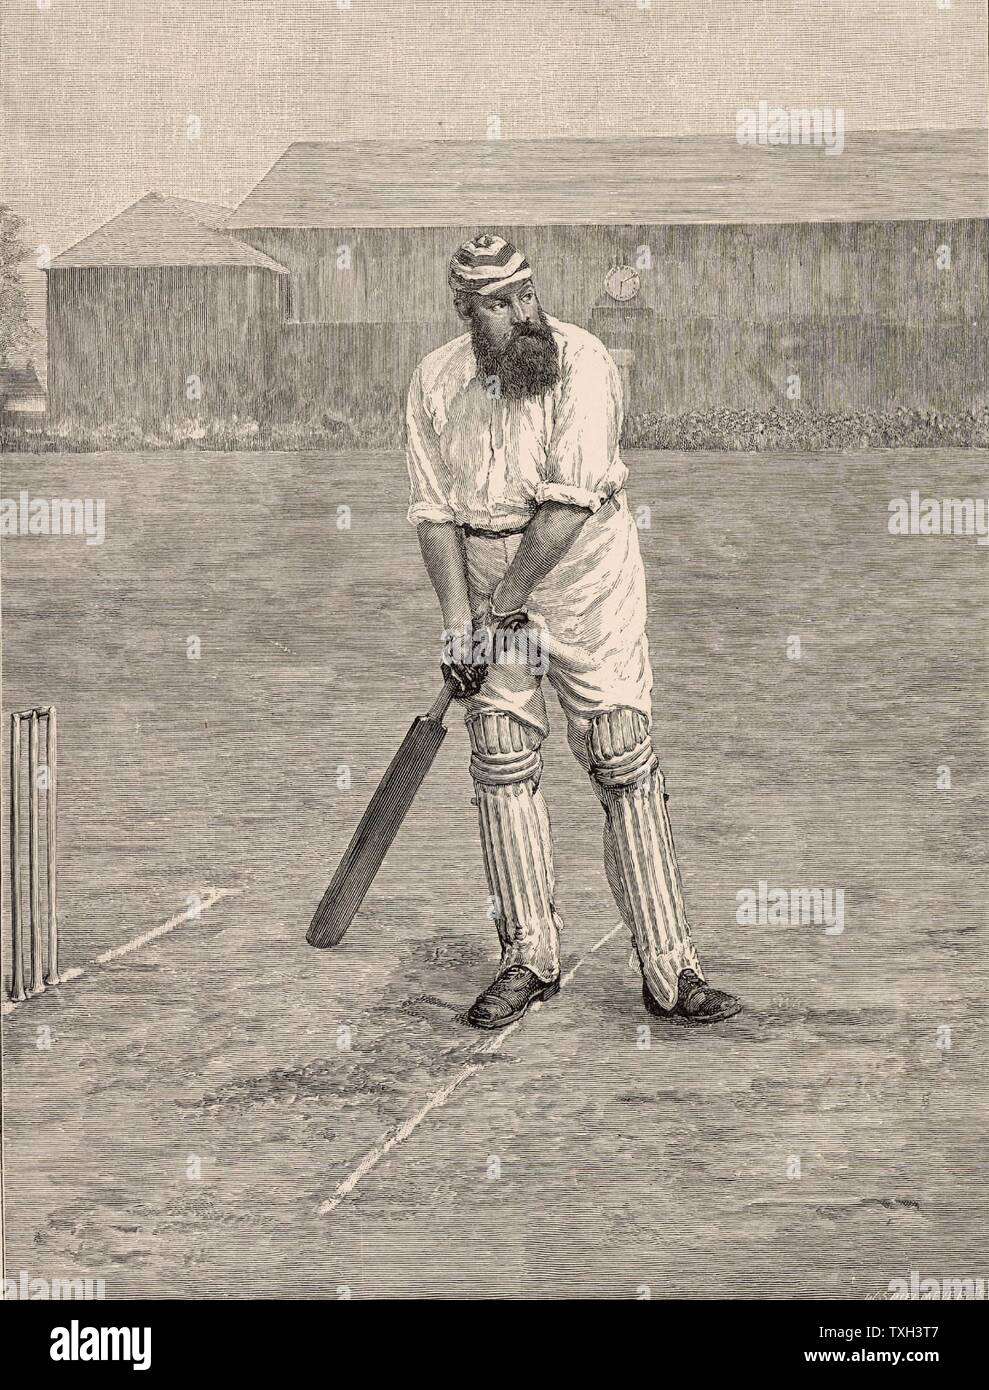 William Gilbert ('W G') Grace English first-class cricketer and physician, born at Downend near Bristol.  Grace at the crease ready to receive a ball from the bowler.  His career lasted from 1864-1908.  Engraving from 'The English Illustrated Magazine' (London, 1890). British Sport Cricket Stock Photo